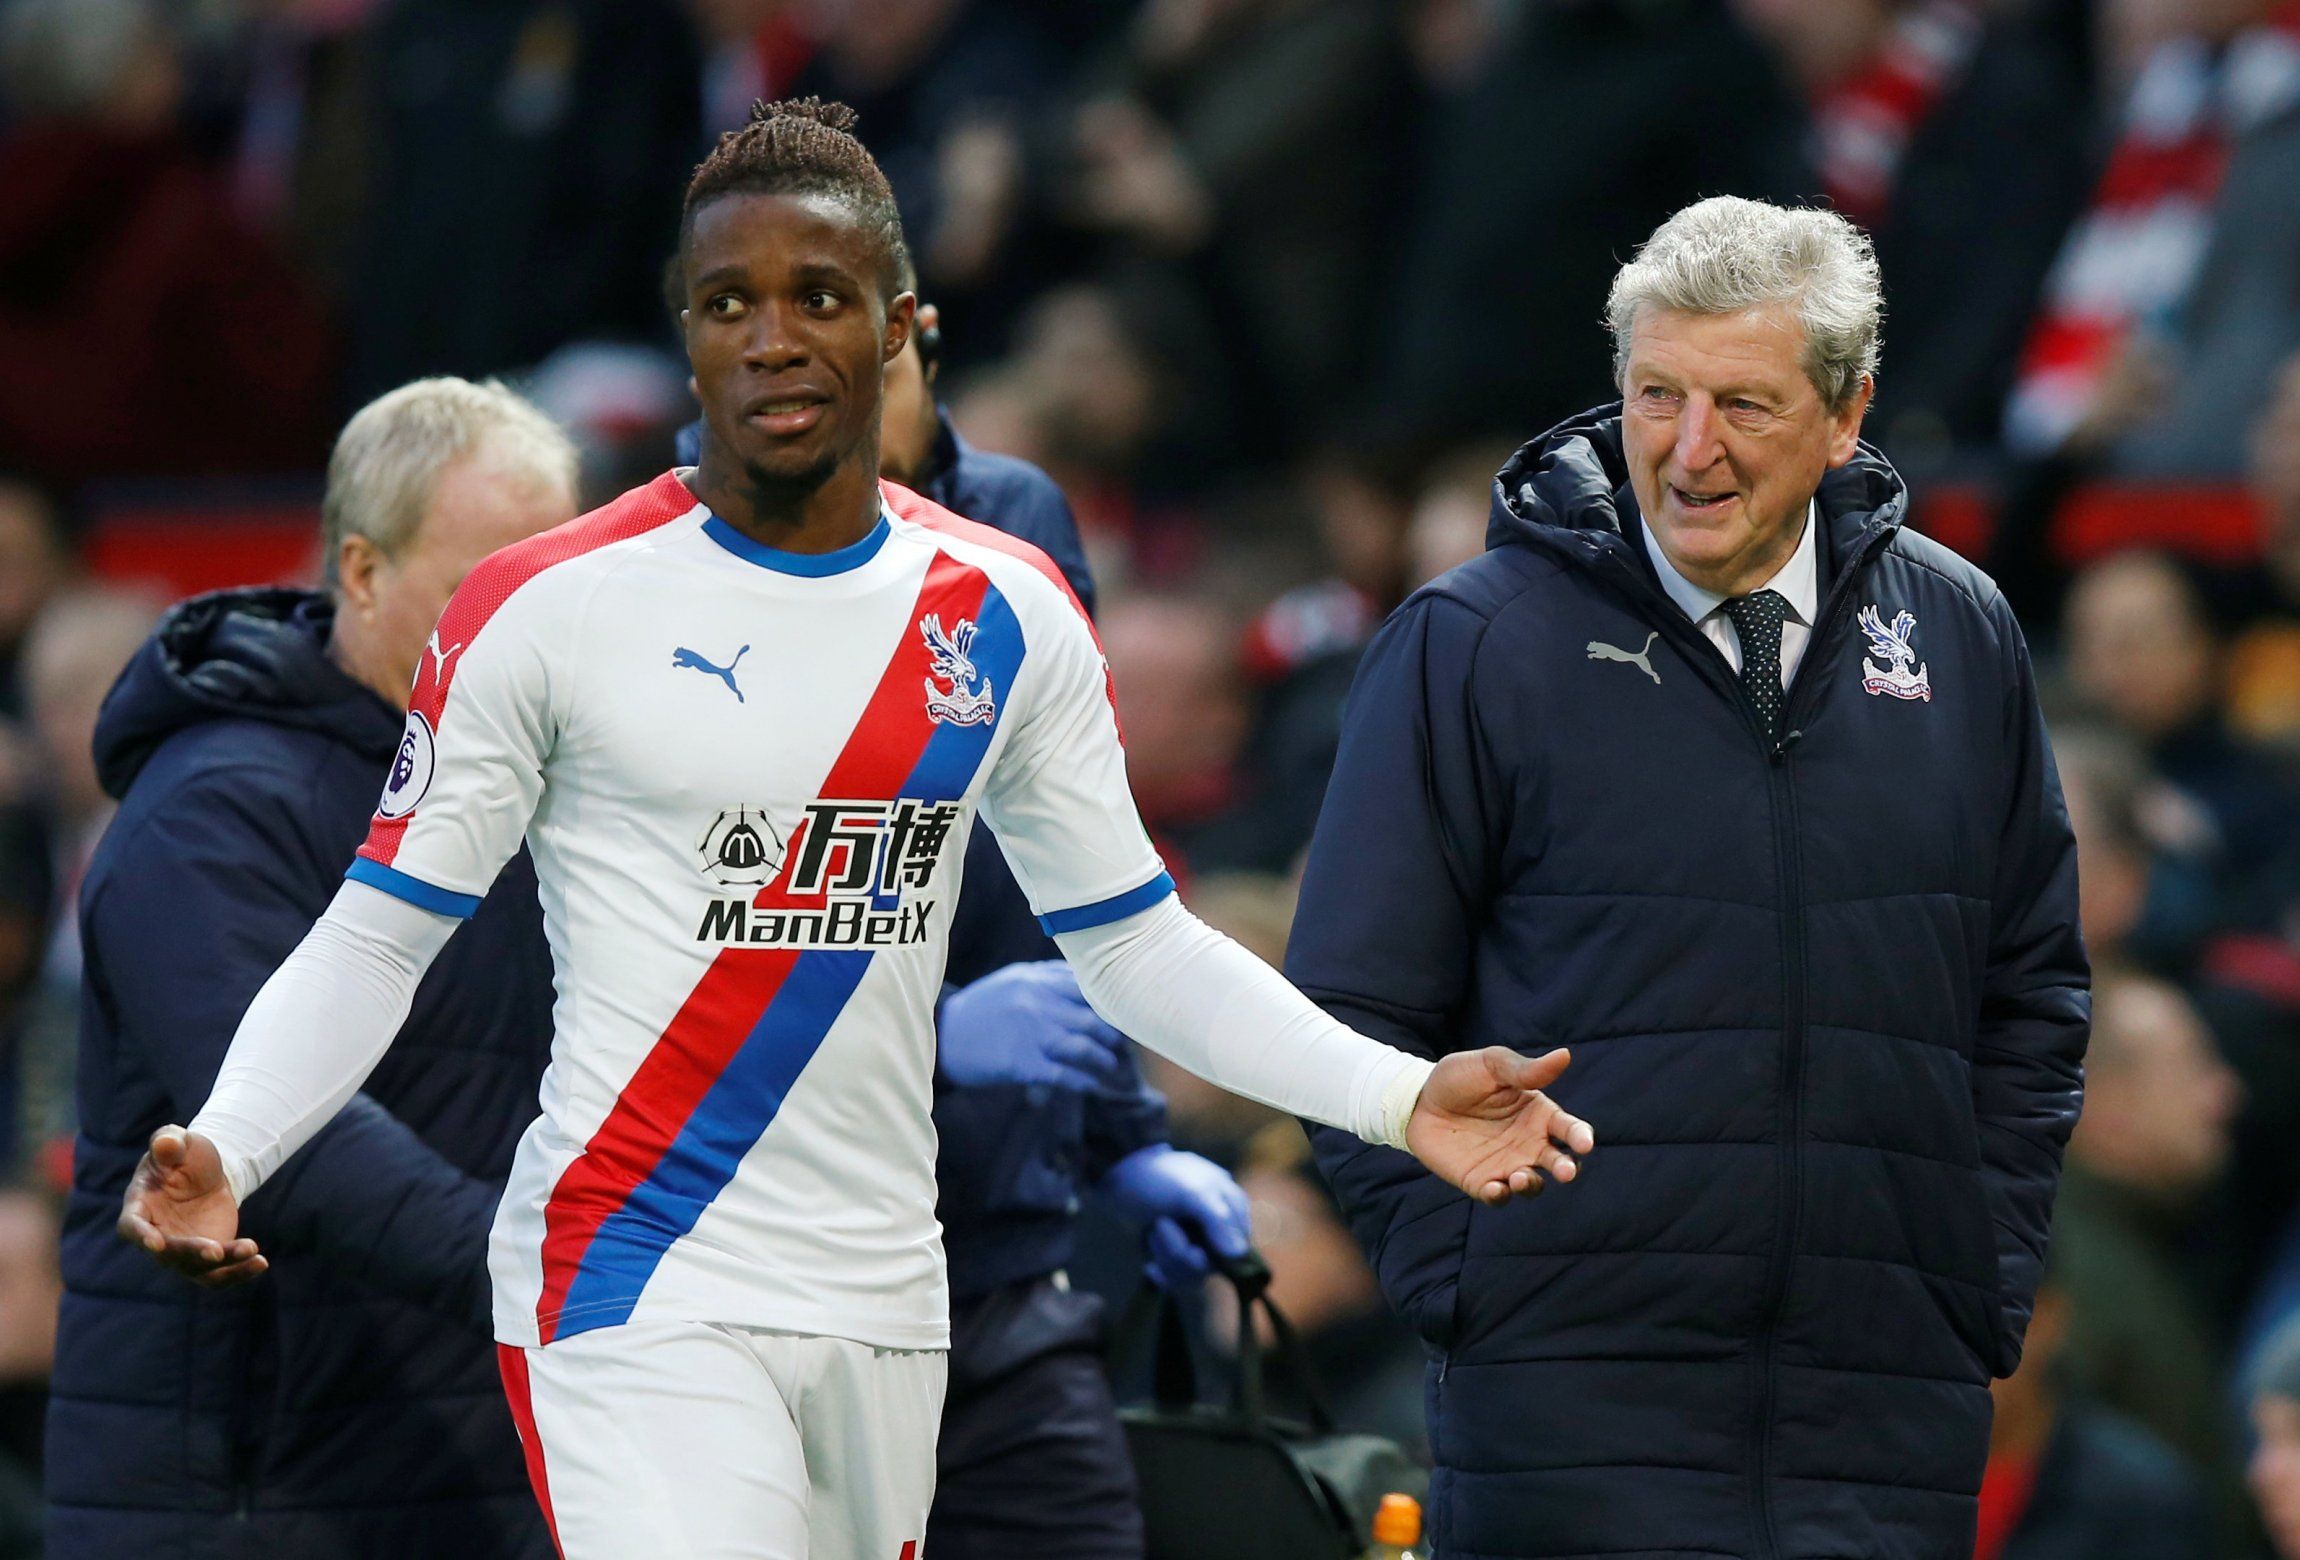 Crystal Palace's Wilfried Zaha and manager Roy Hodgson in discussion at half time at Manchester United